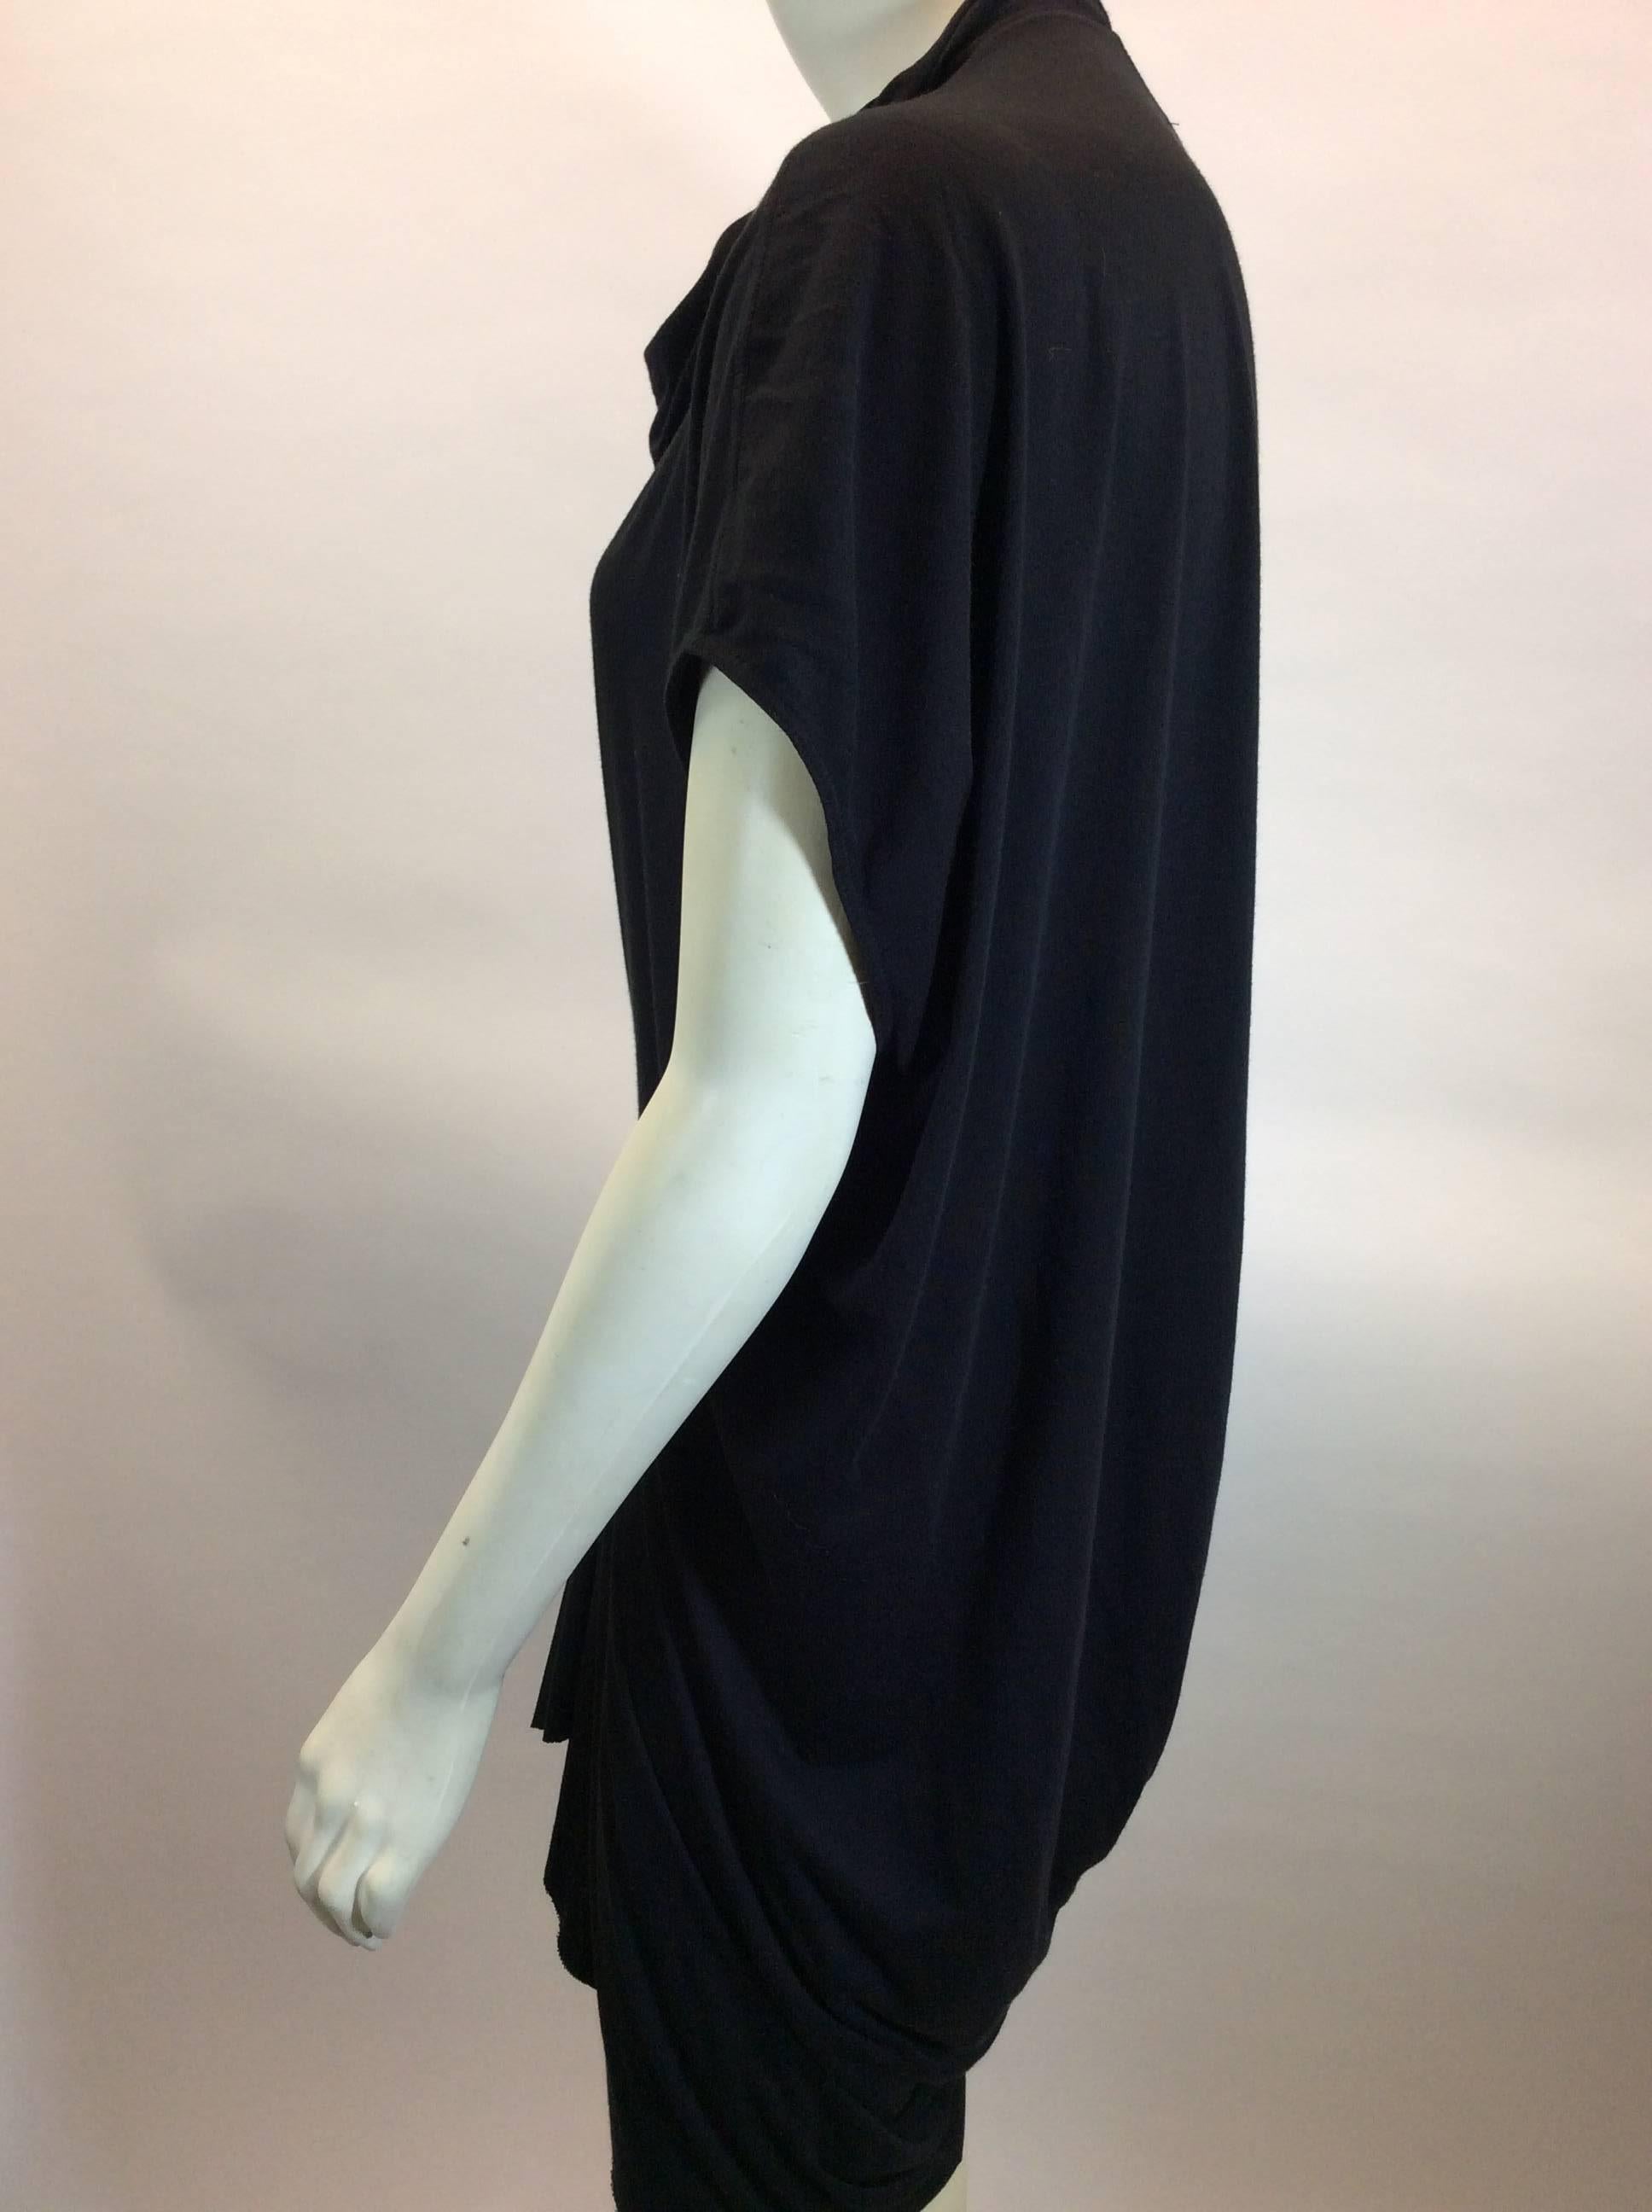 Black Center Seam Draped Dress
Features low armholes and cowl neck
High-low hemline
Size and fiber content unknown (see garment measurements)